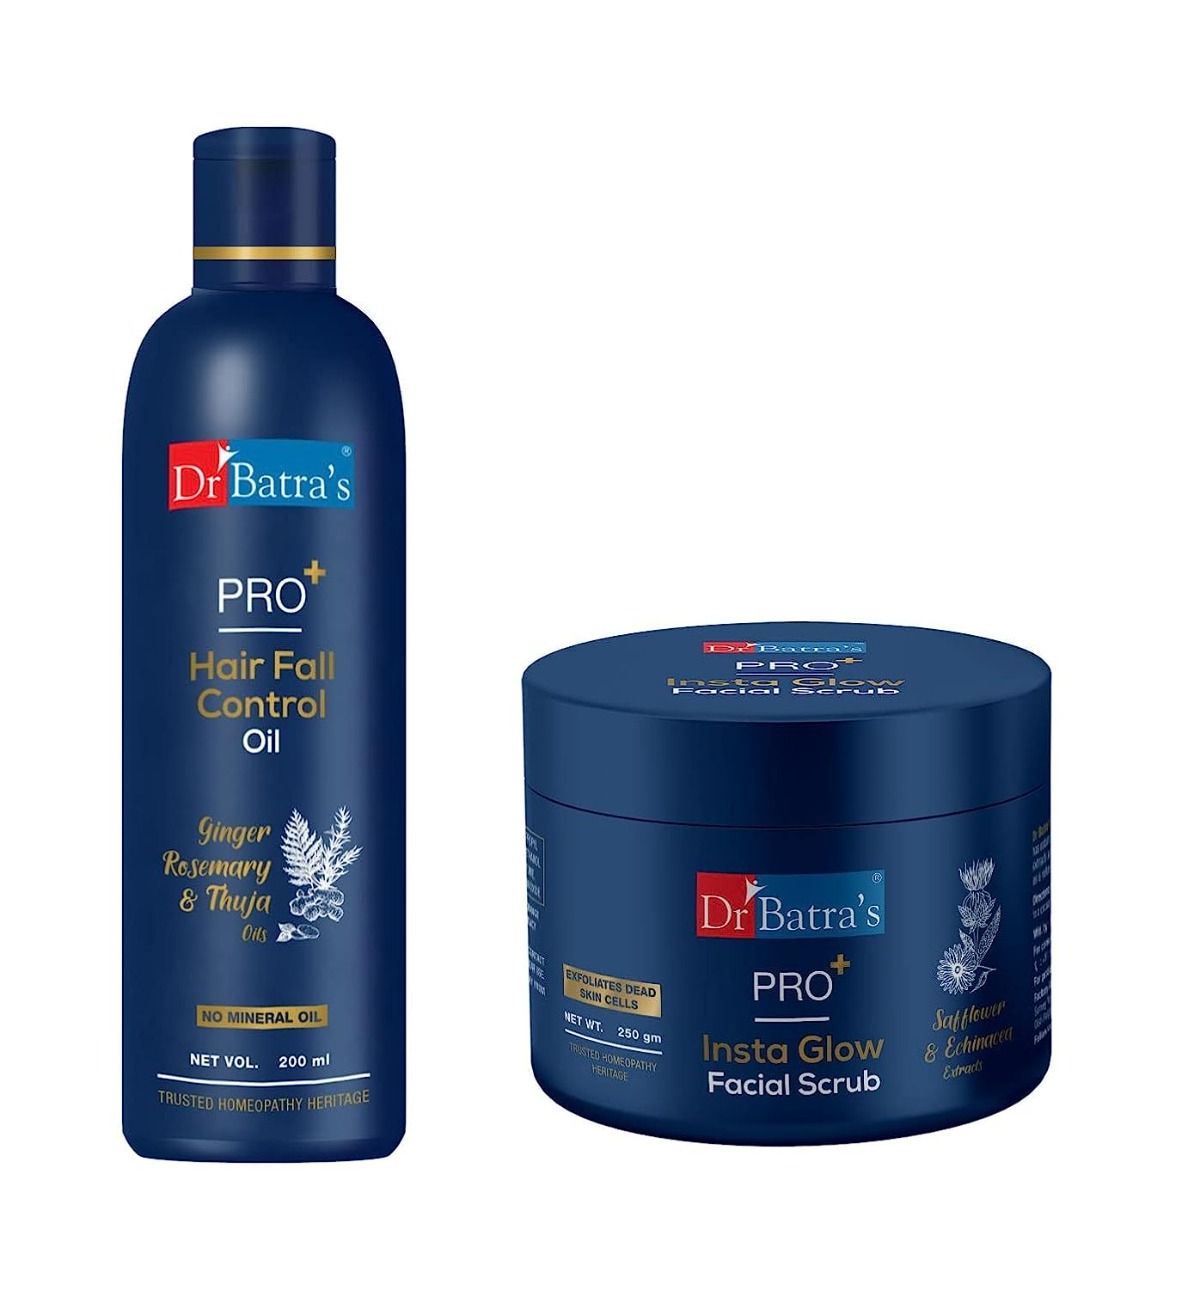     			Dr Batra's PRO+ Hair Fall Control Oil -200 ml and PRO+ Insta Glow Facial Scrub-250 g (Pack of 2)